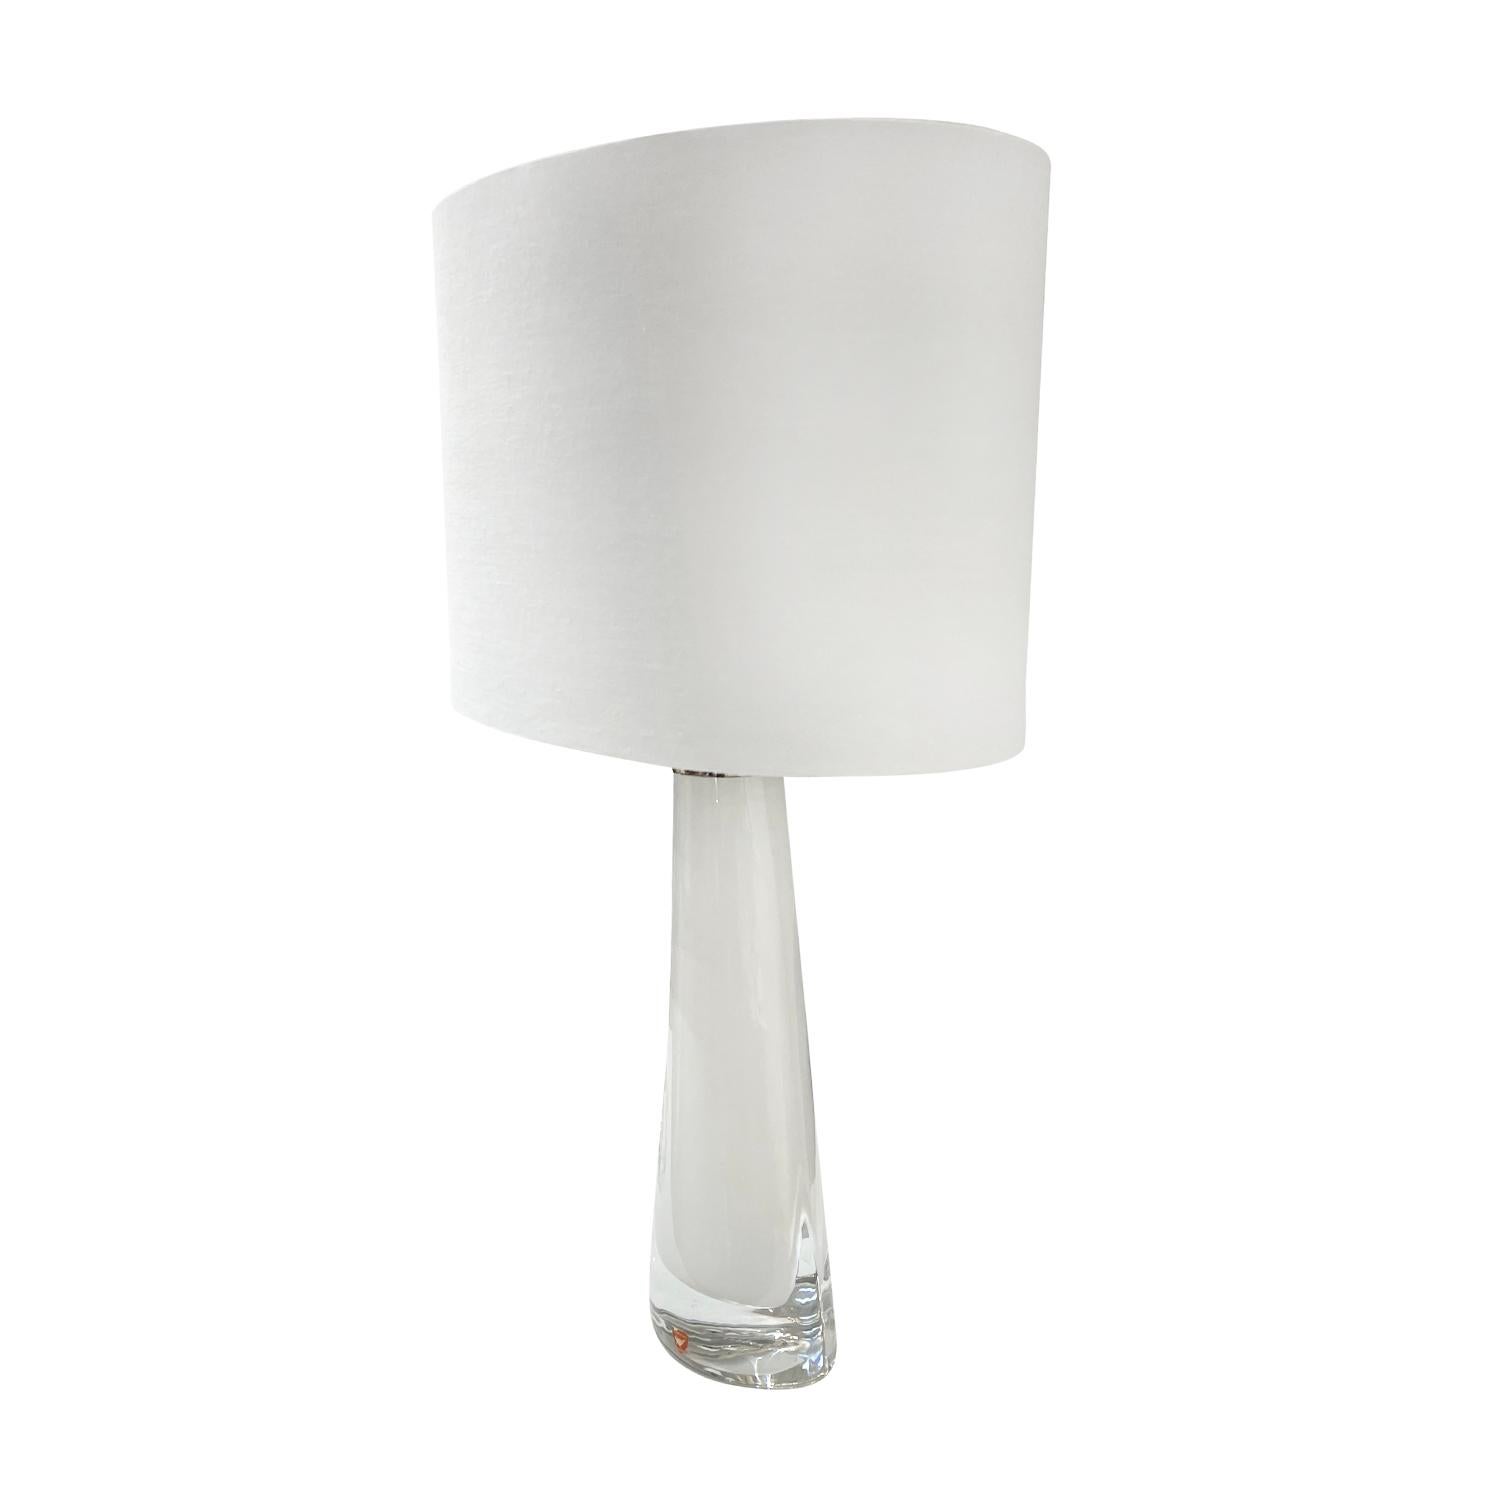 Mid-Century Modern 20th Century White Swedish Orrefors Table Lamp, Desk Light by Carl Fagerlund